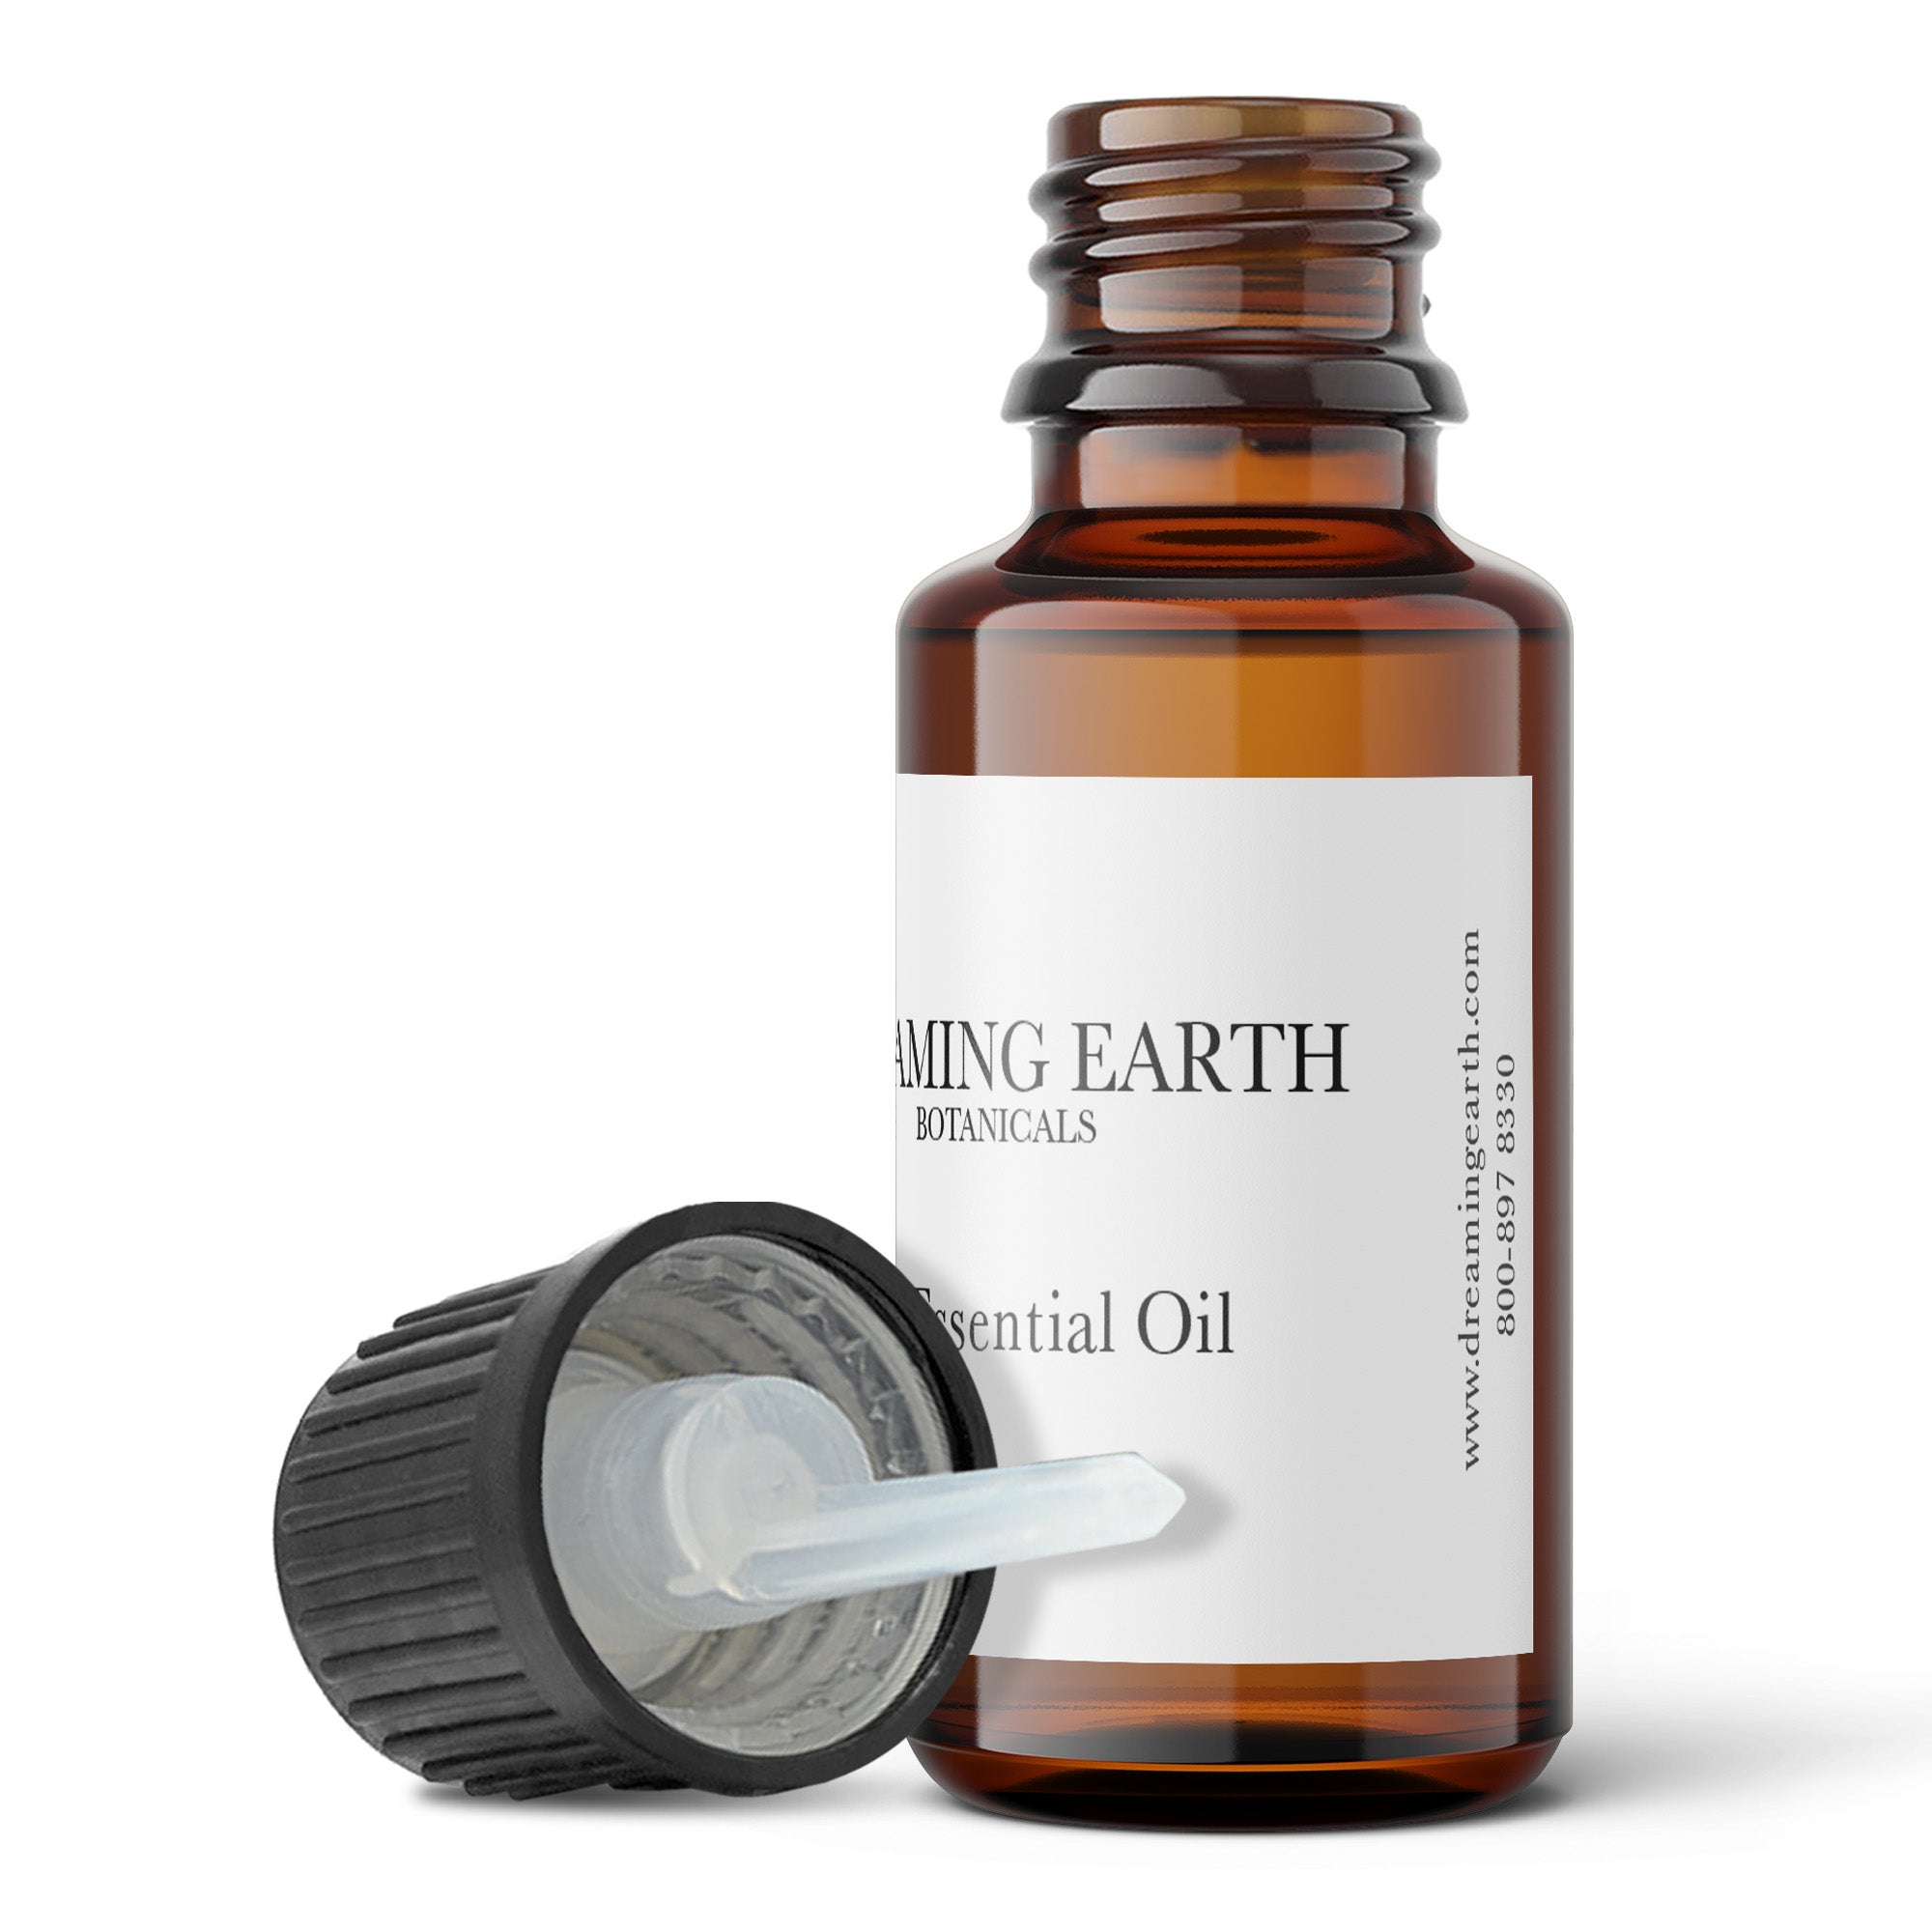 Load image into Gallery viewer, Spearmint Essential Oil - Dreaming Earth Inc
